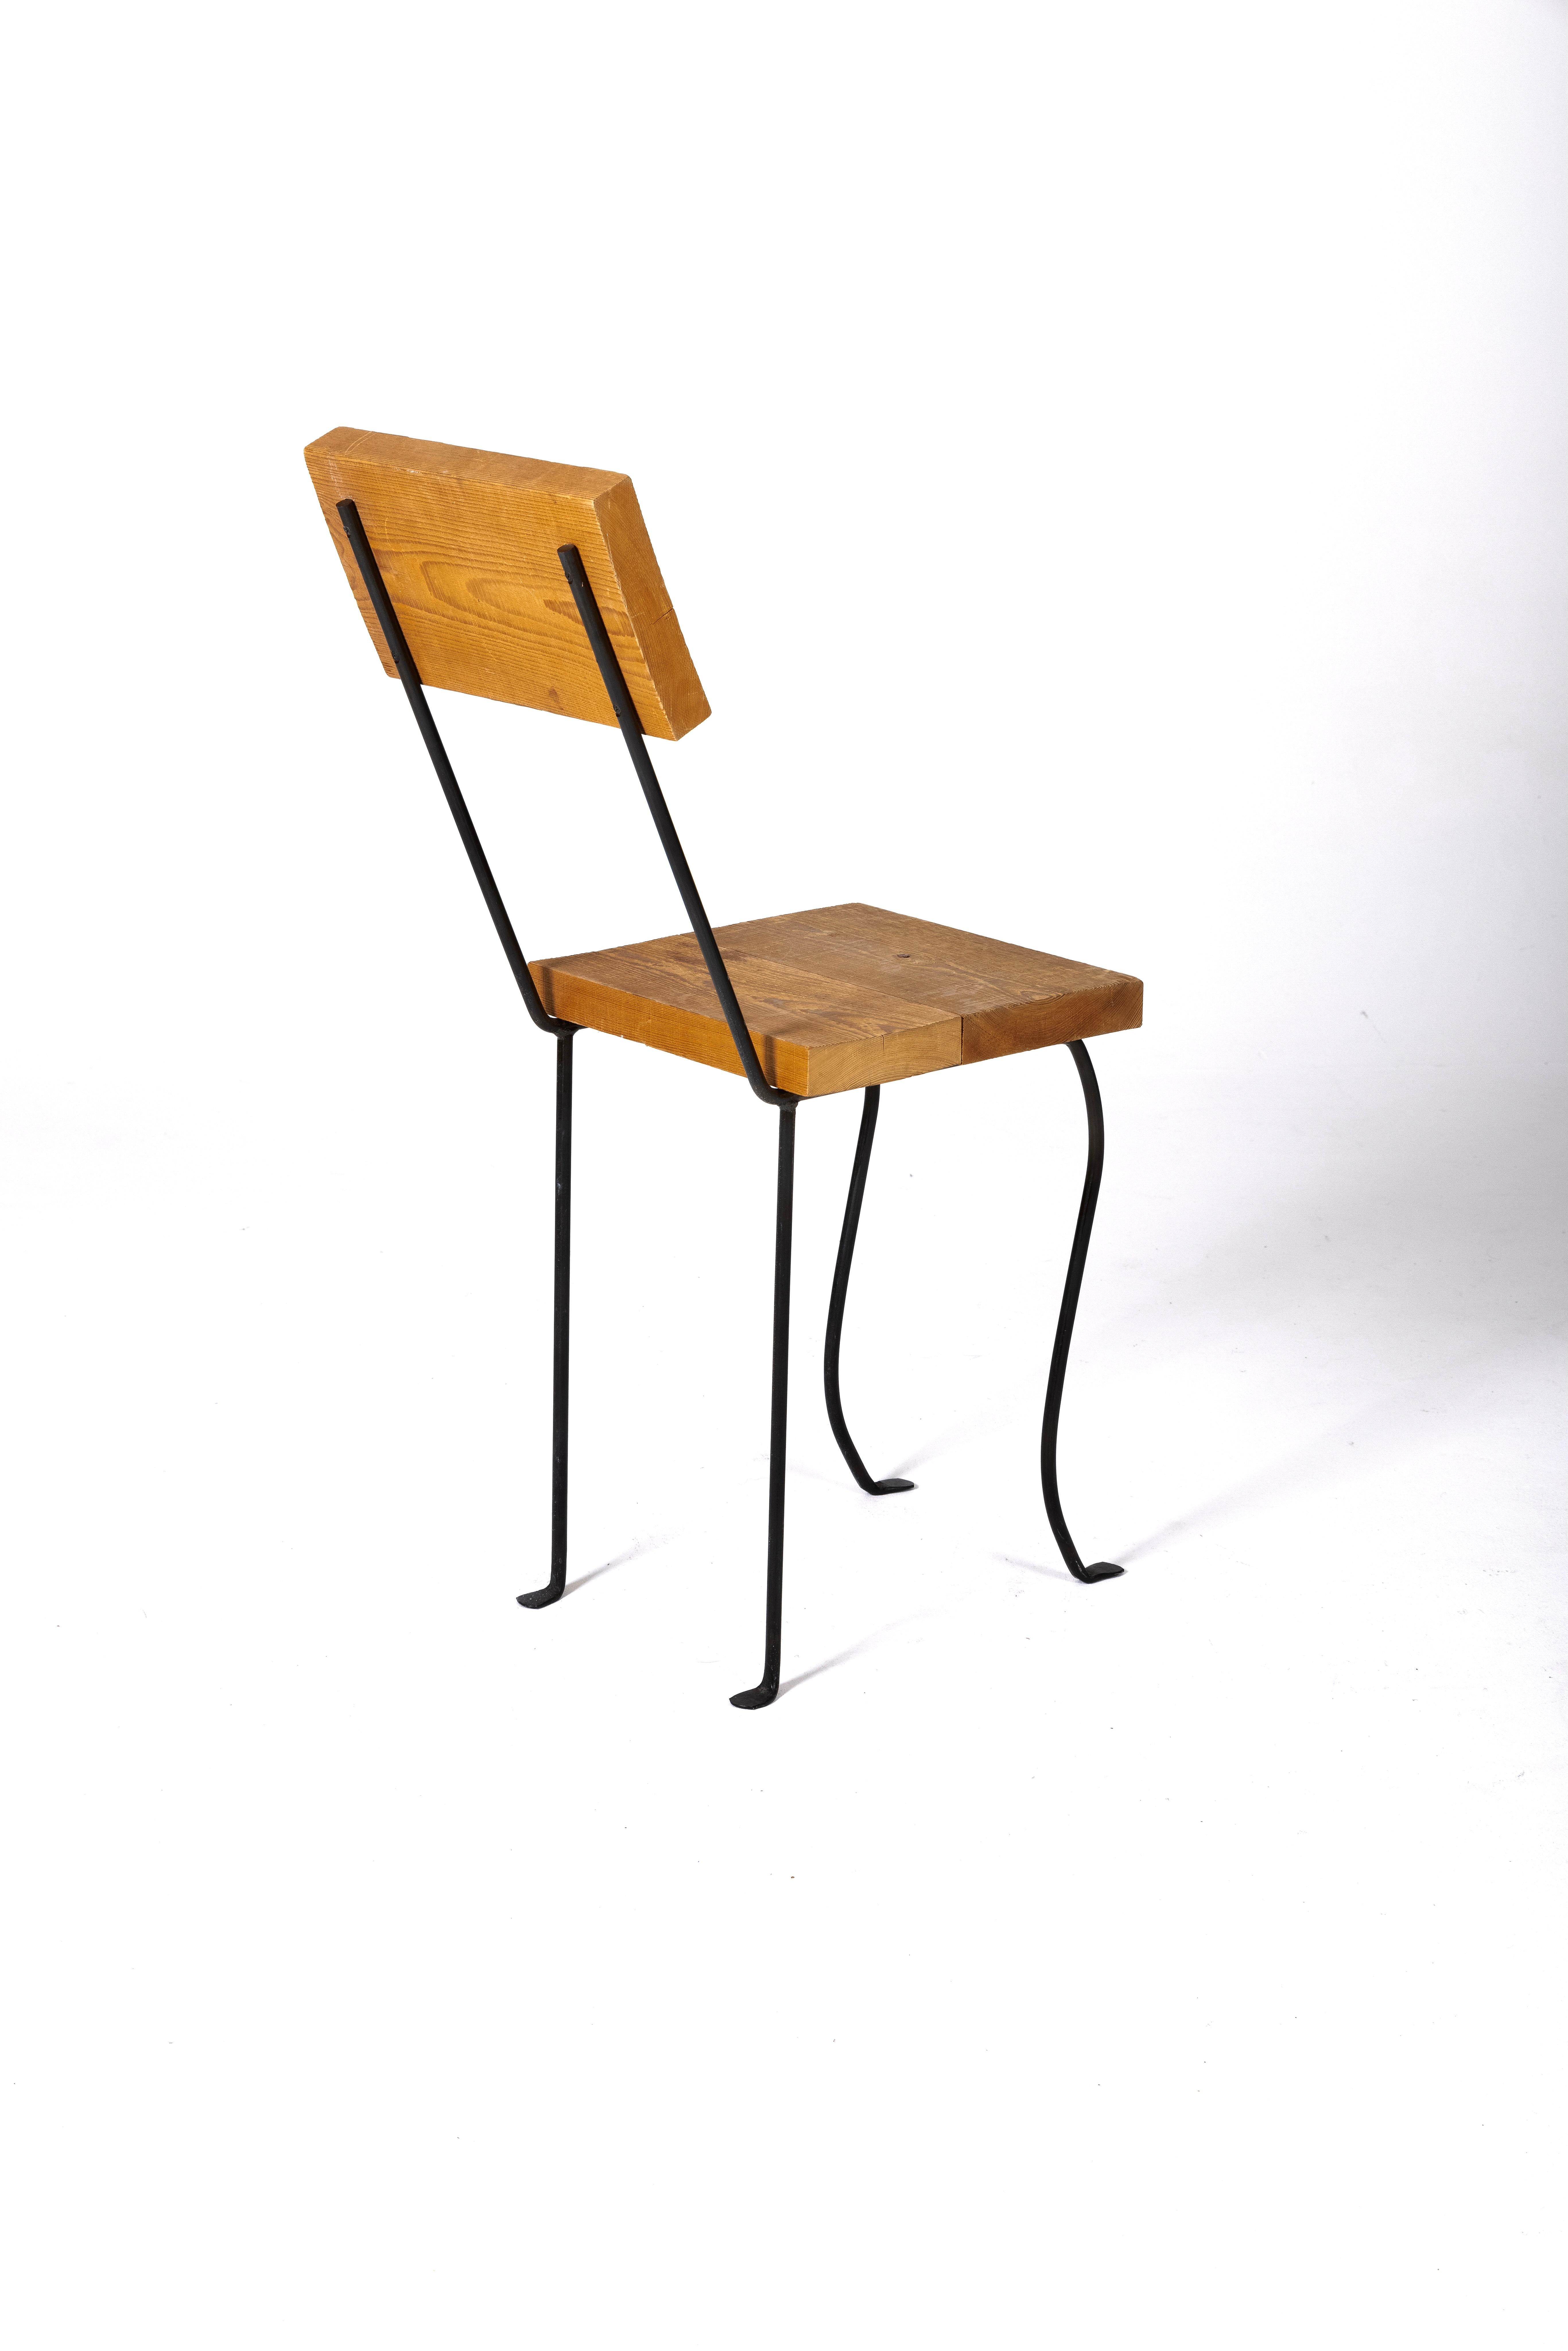 Wood and metal chair by Patrice Gruffaz For Sale 4